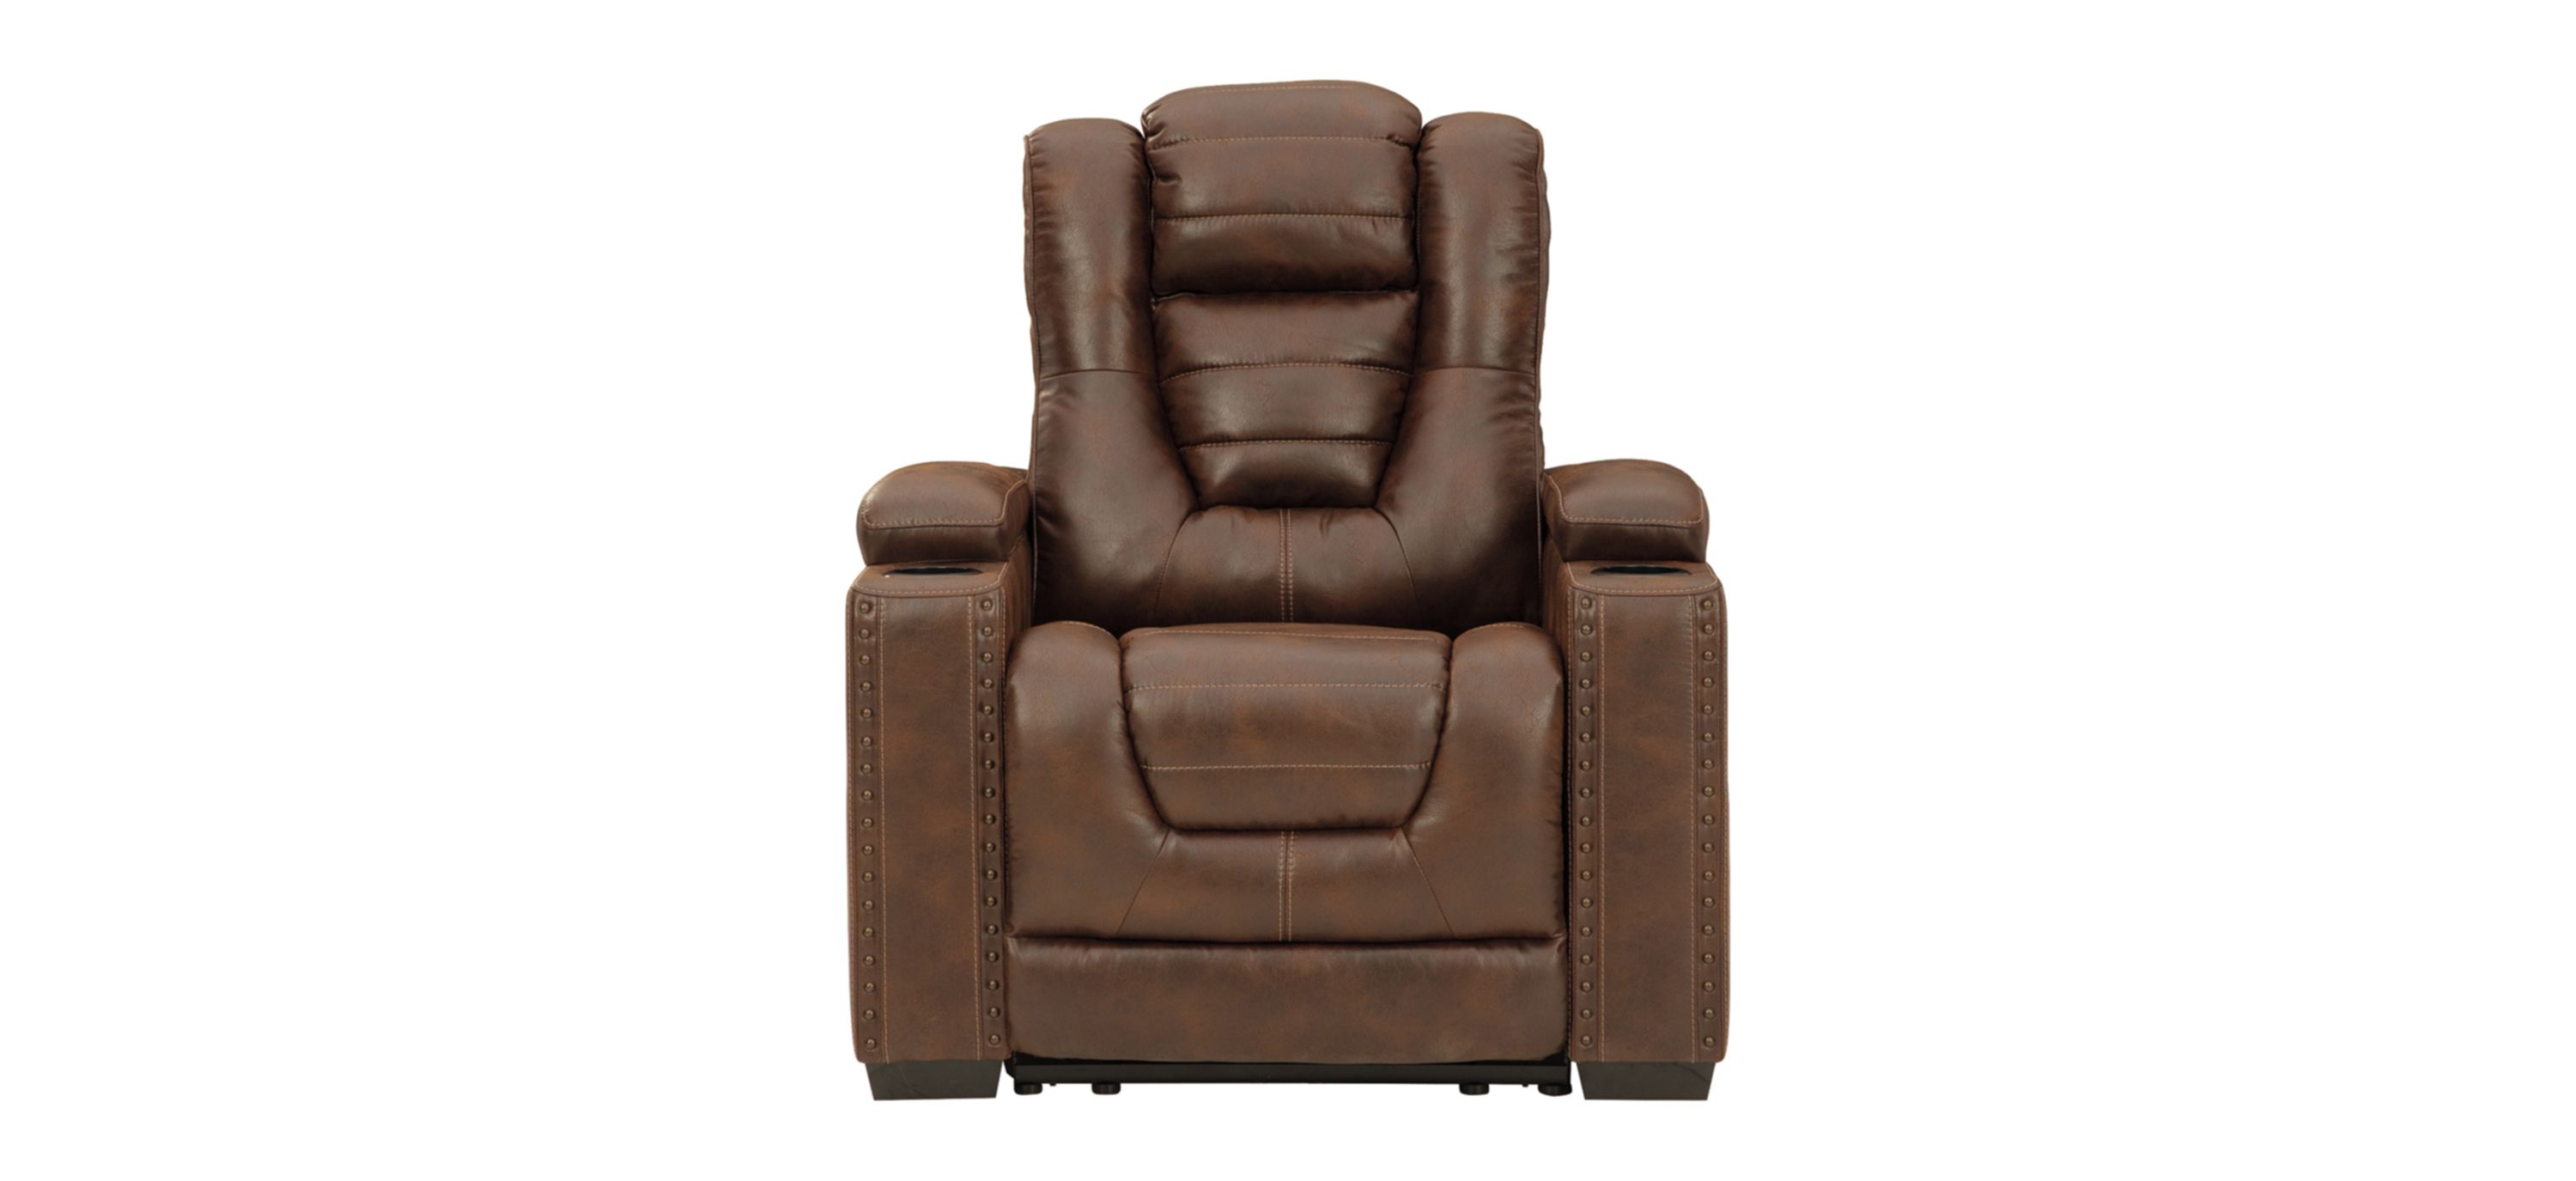 Owner%27s Box Power Recliner with Adjustable Headrest